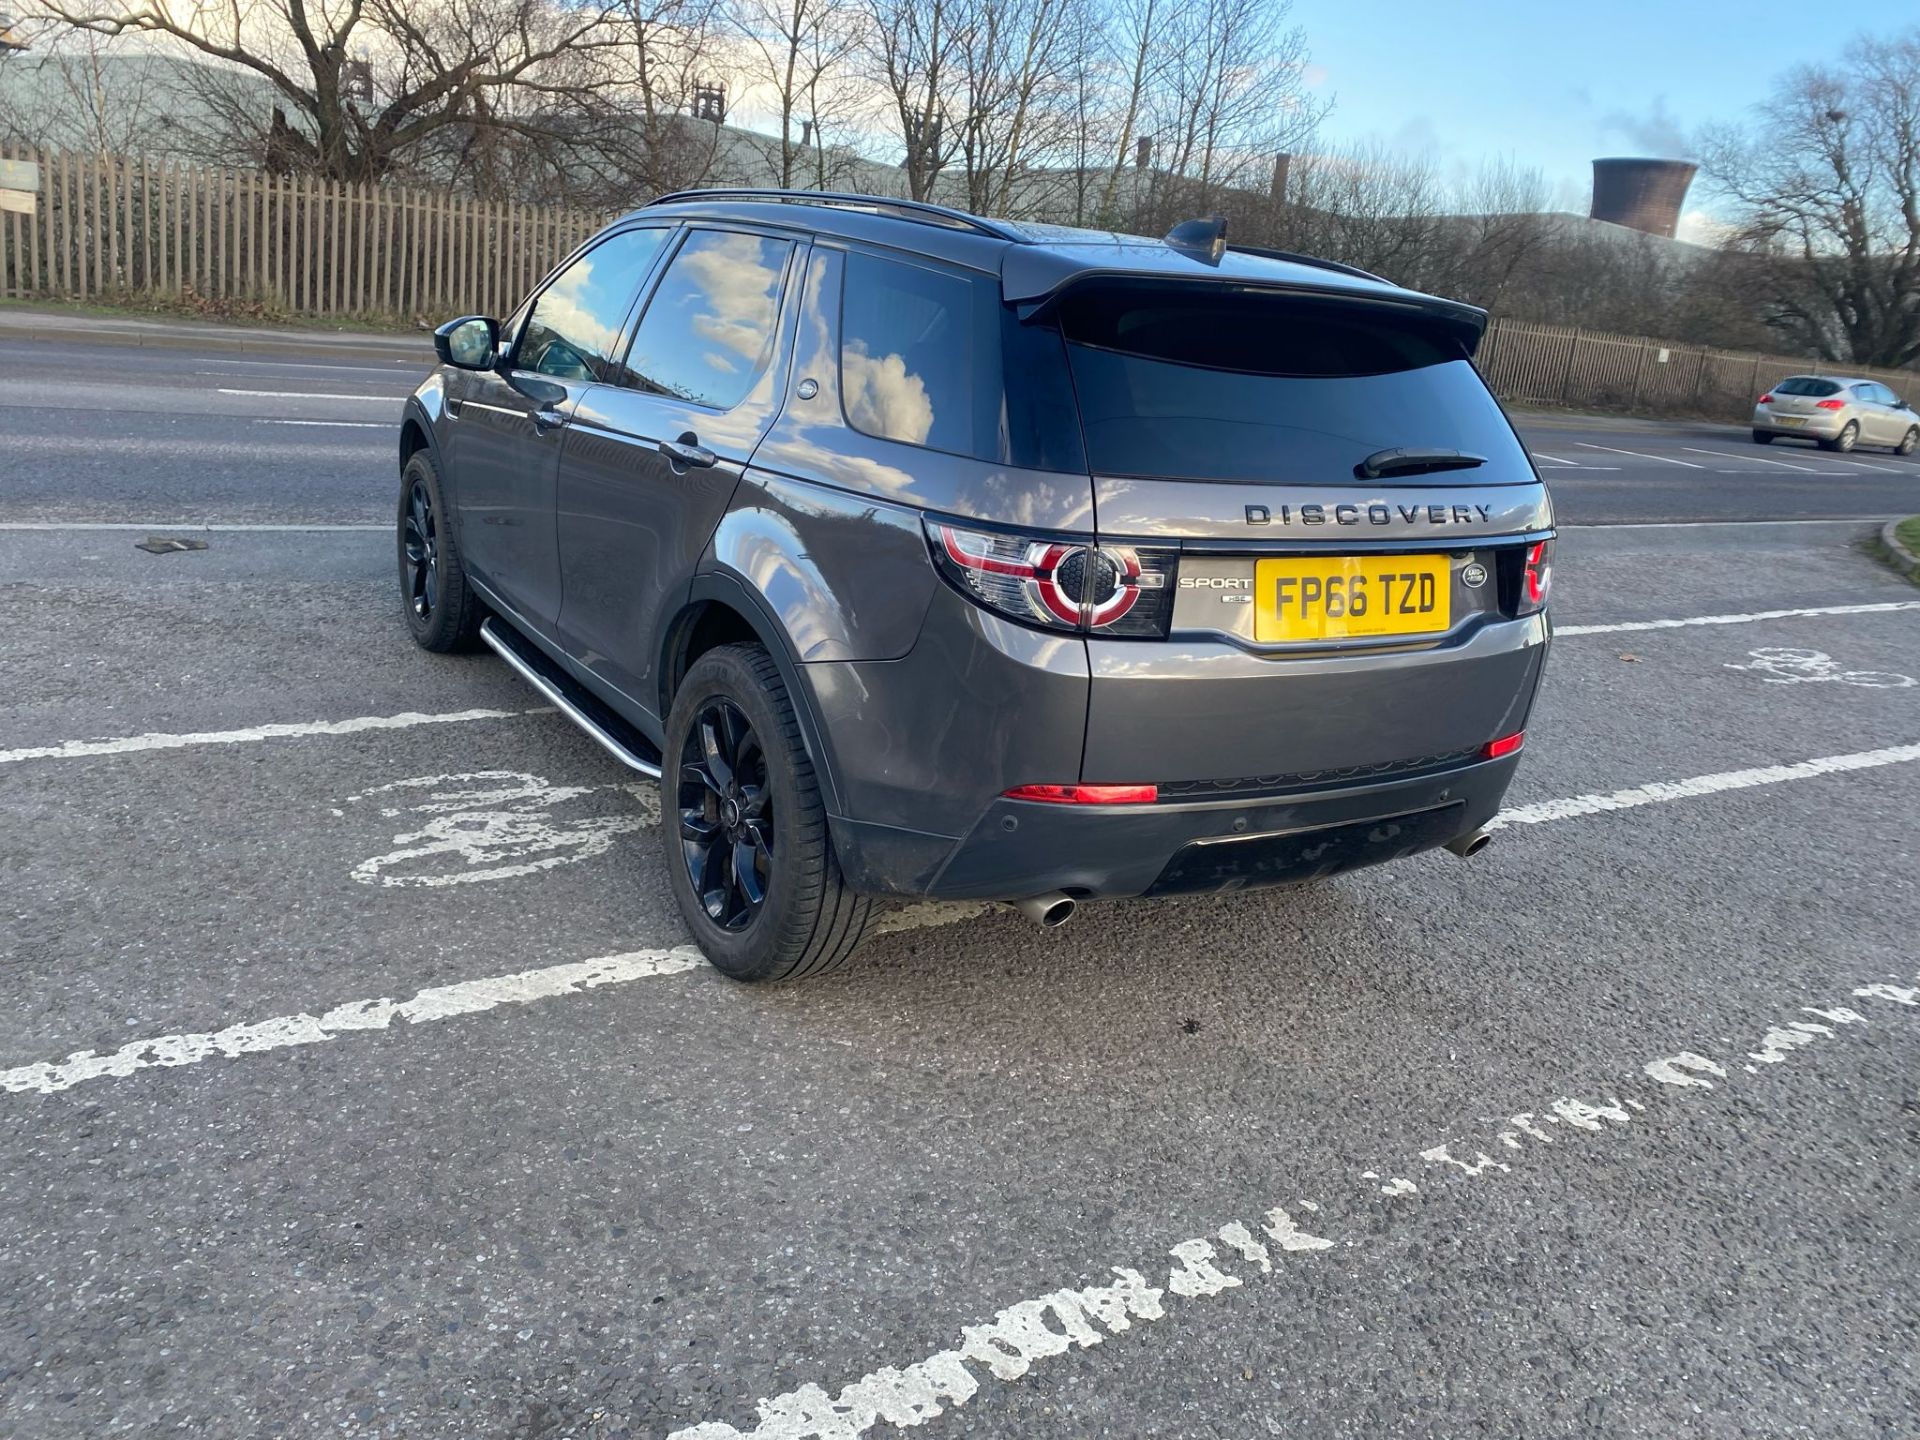 2016 66 LAND ROVER DISCOVERY SPORT HSE SUV ESTATE- 88K WITH LAND ROVER SERVICE HISTORY - PAN ROOF. - Image 19 of 19